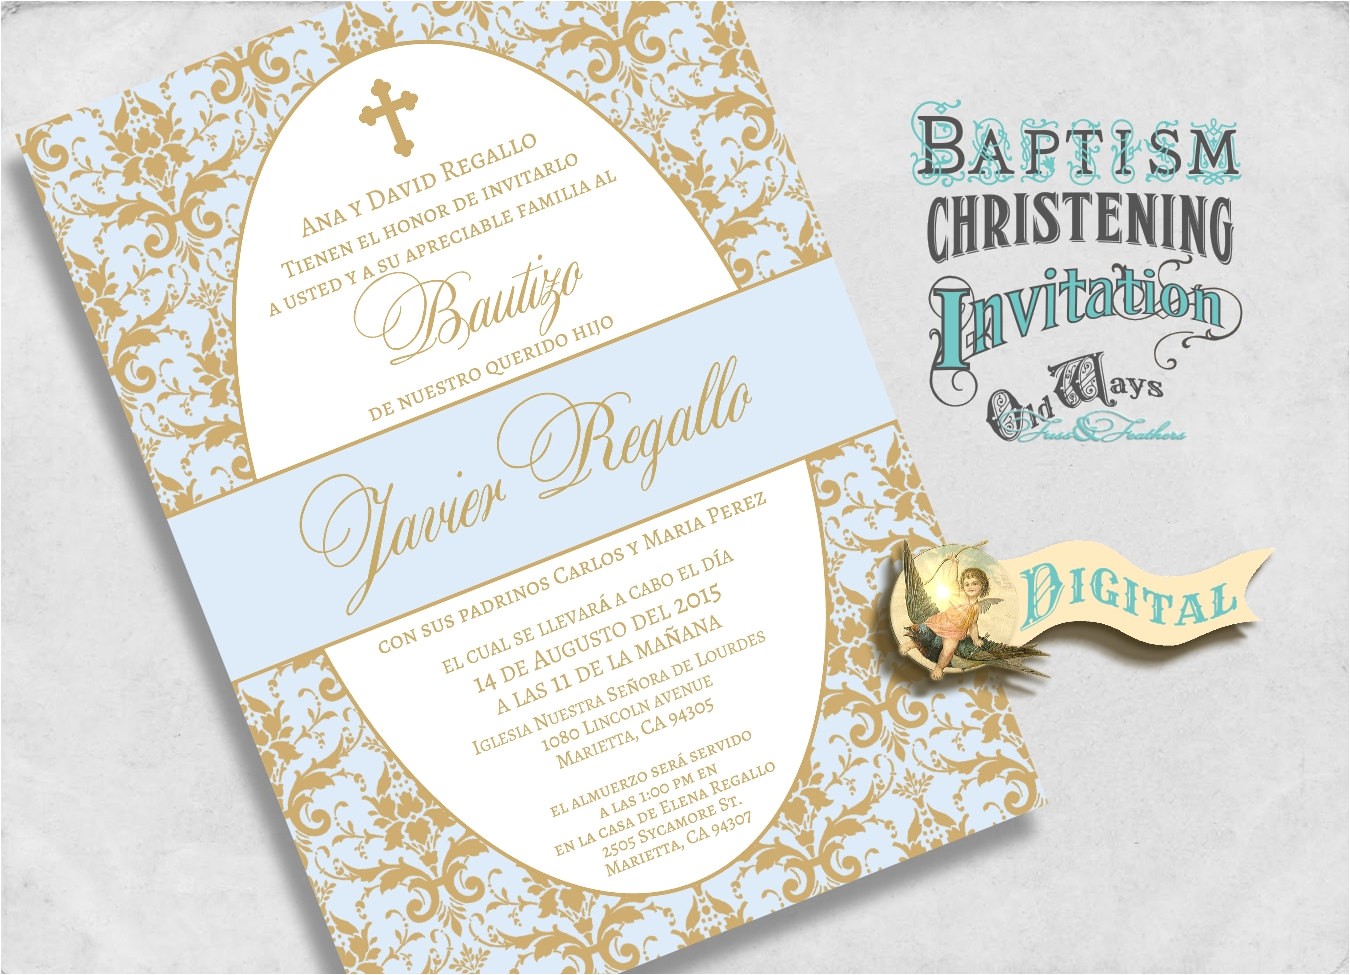 Personalized Baptism Invitations In Spanish Elegant Spanish Baptism Invitations Blue and Gold Baby Boy